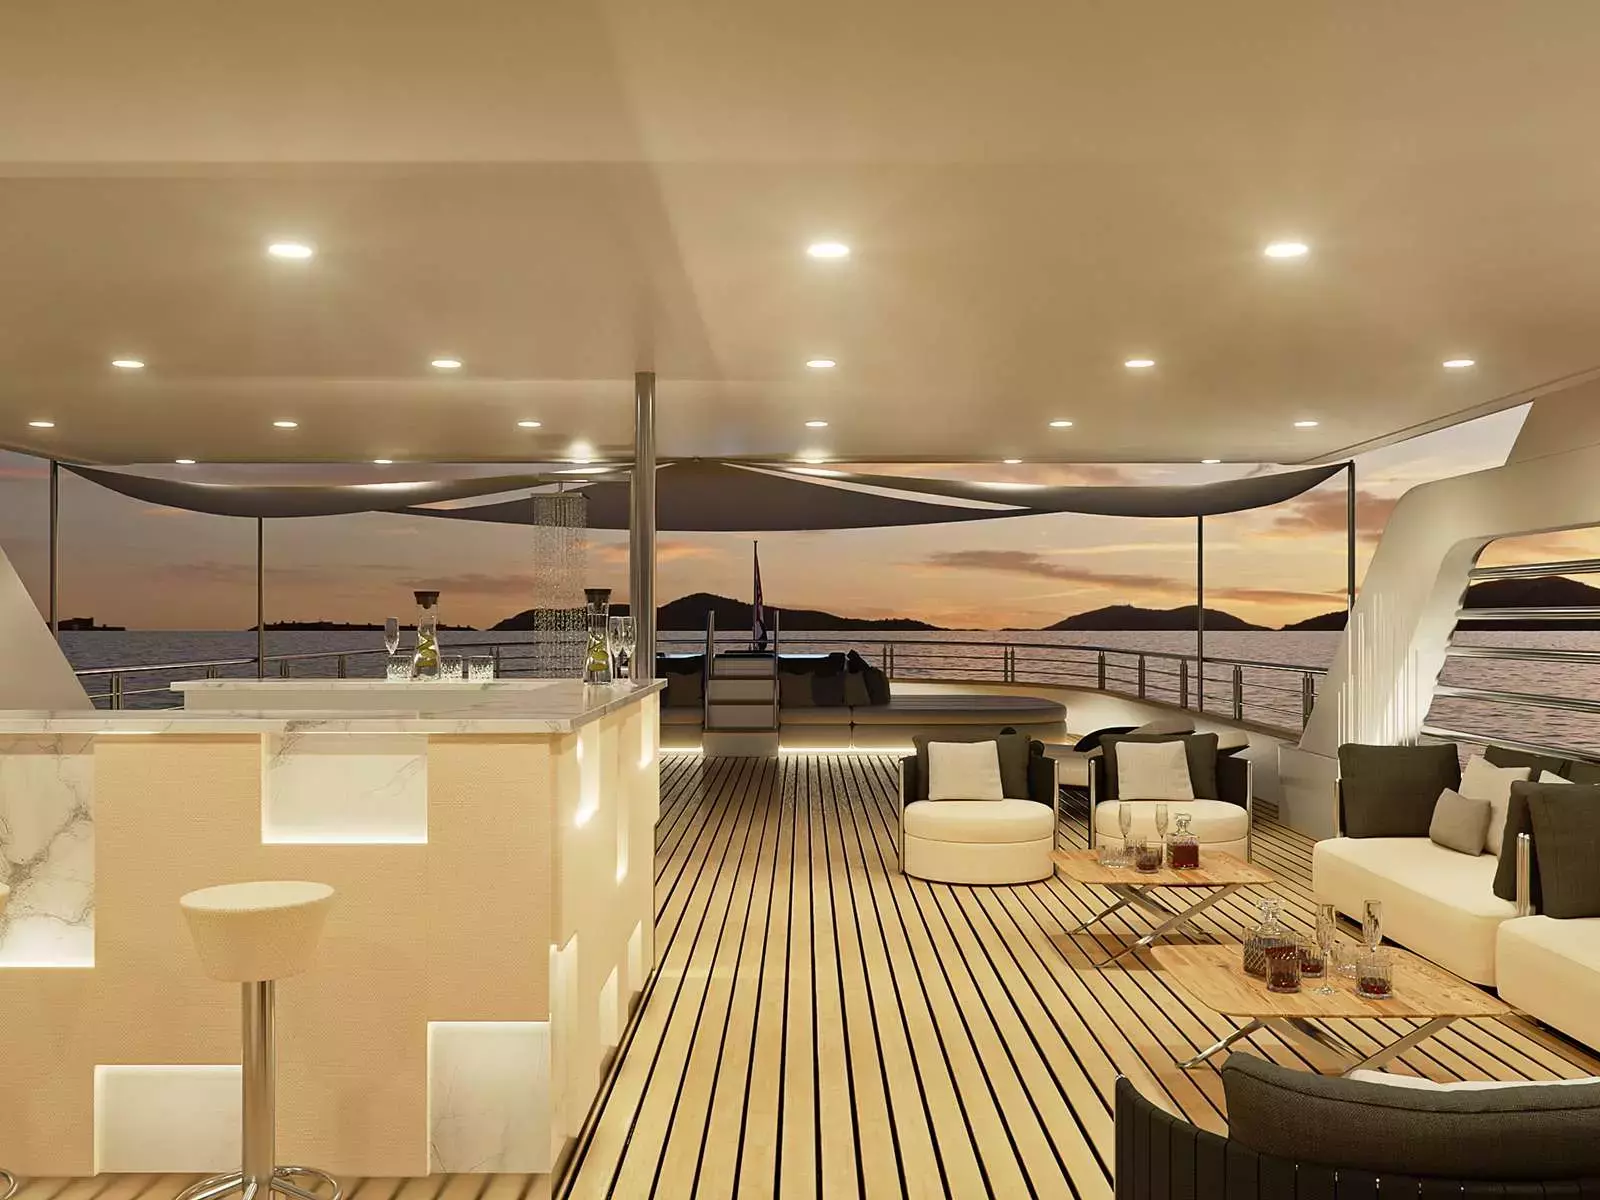 Cristal by Custom Made - Special Offer for a private Motor Yacht Charter in Tribunj with a crew